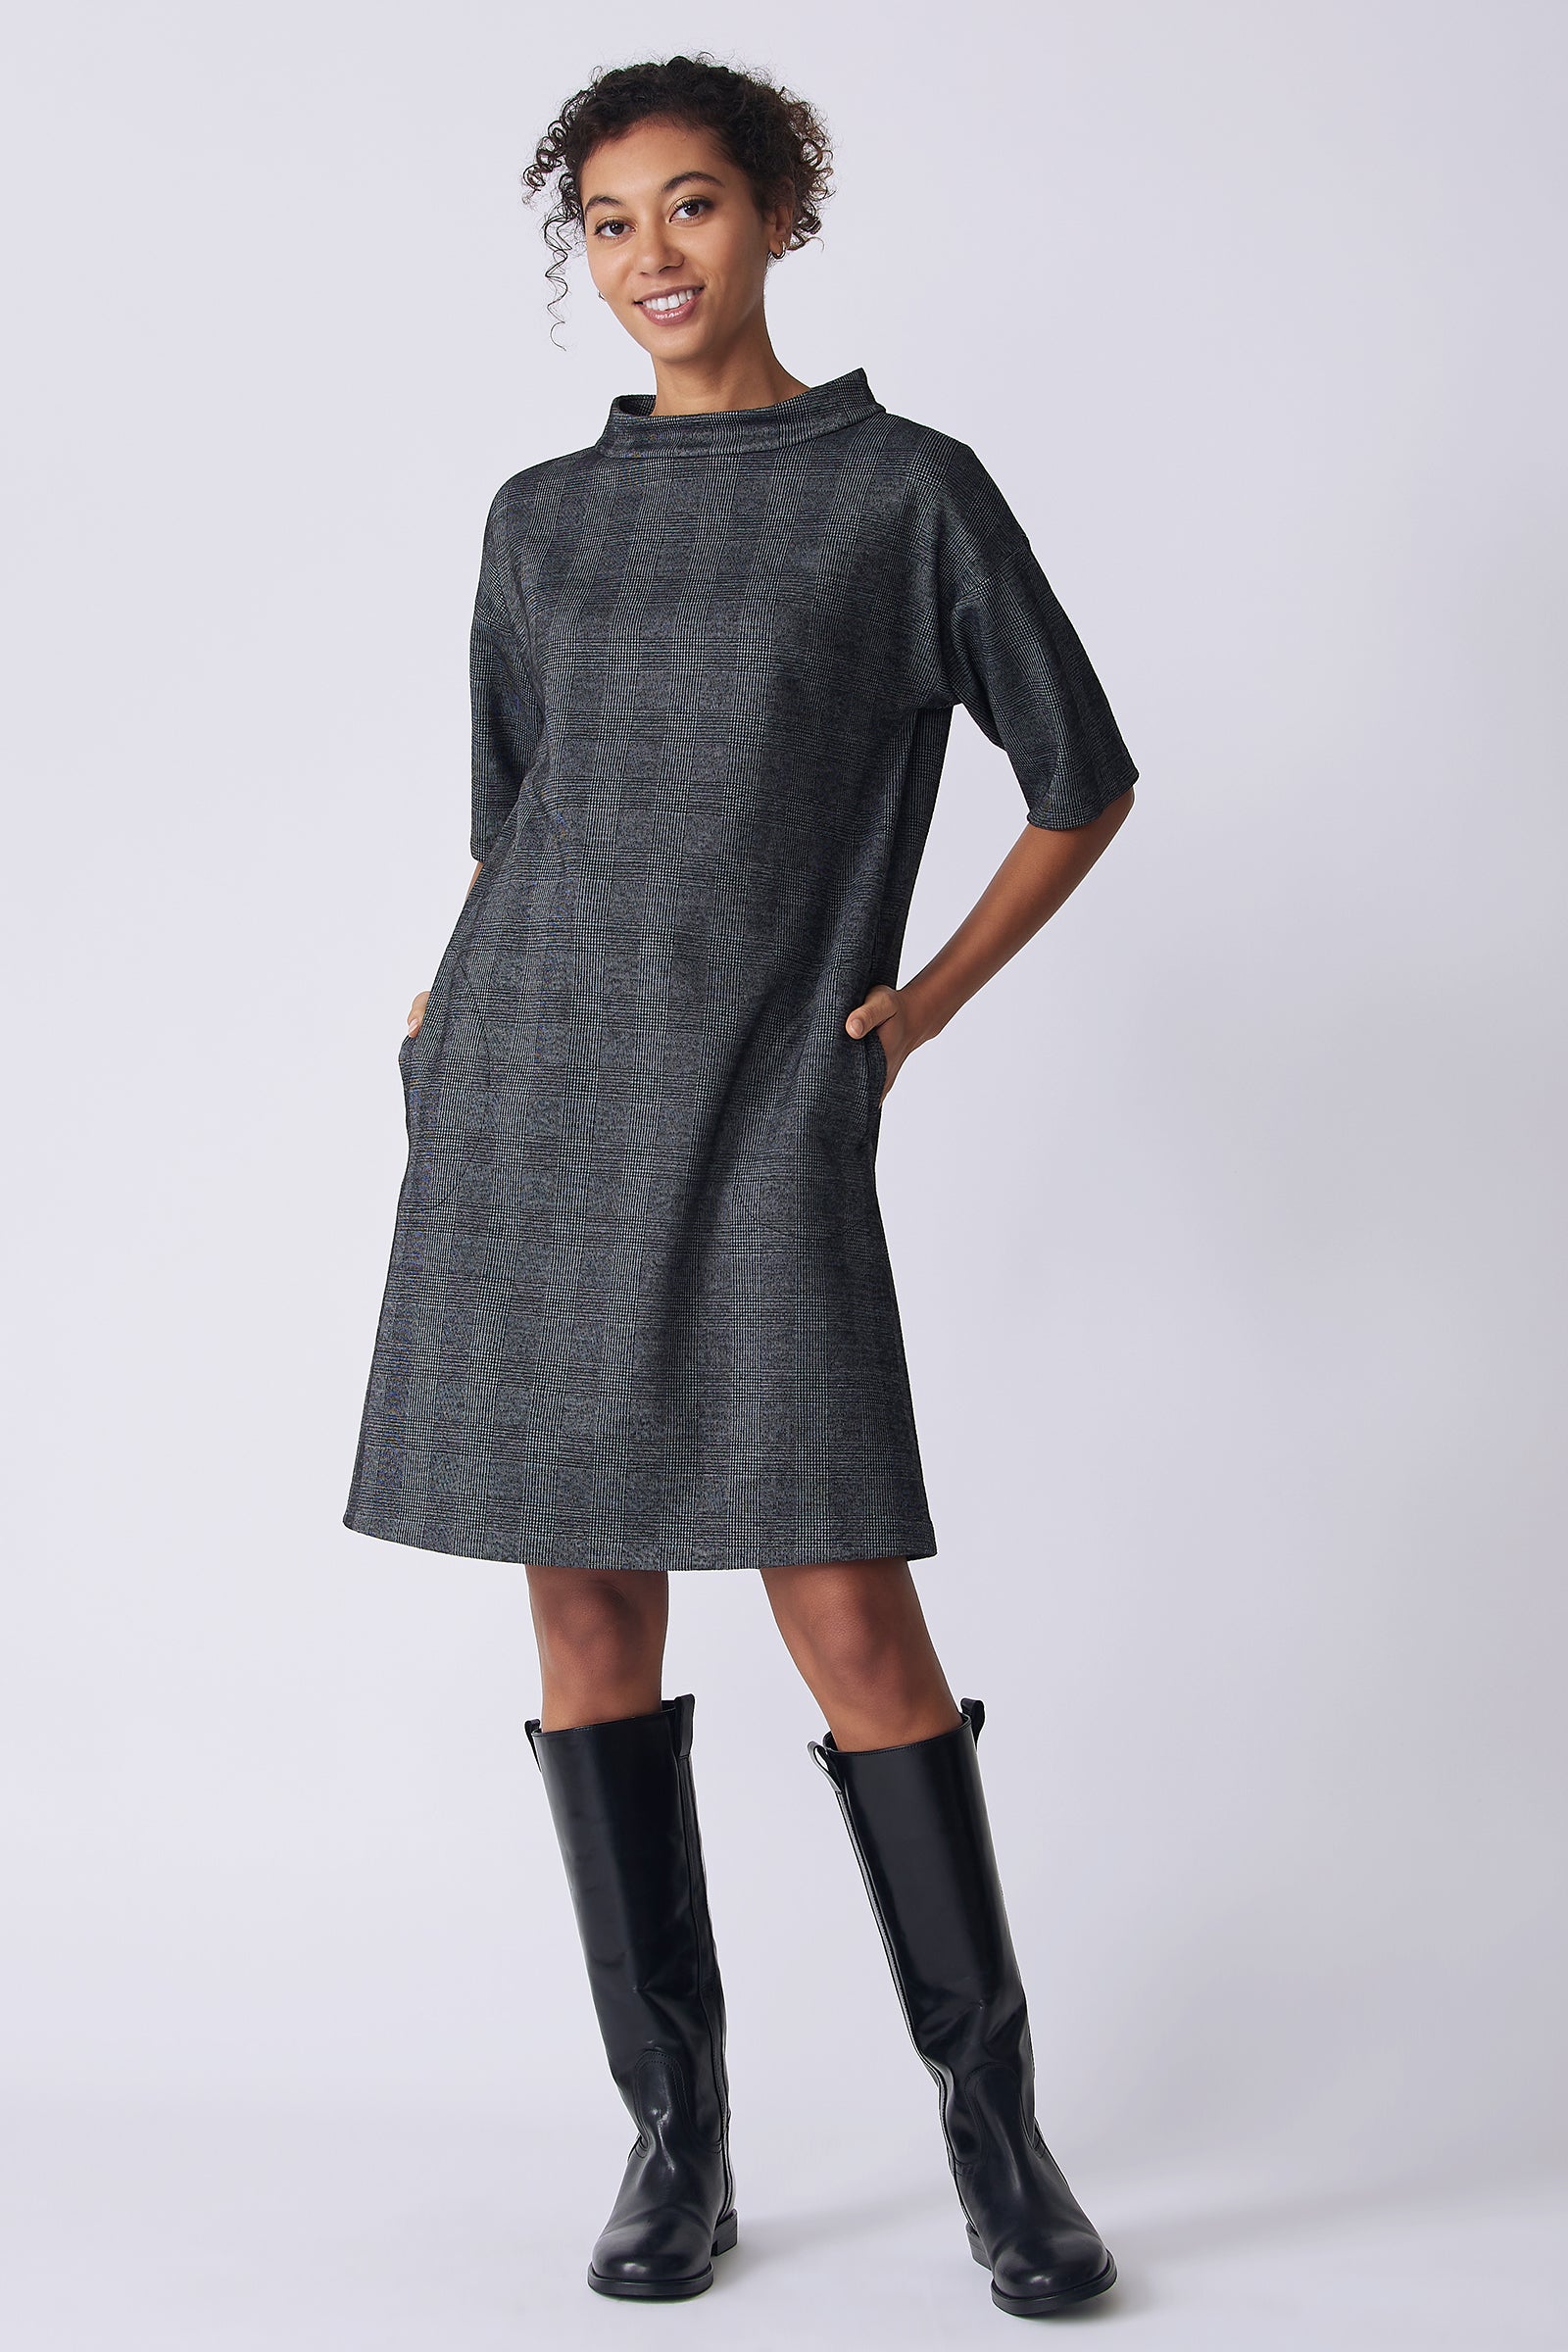 Kal Rieman Avery Dress in black plaid on model front view hands in pockets